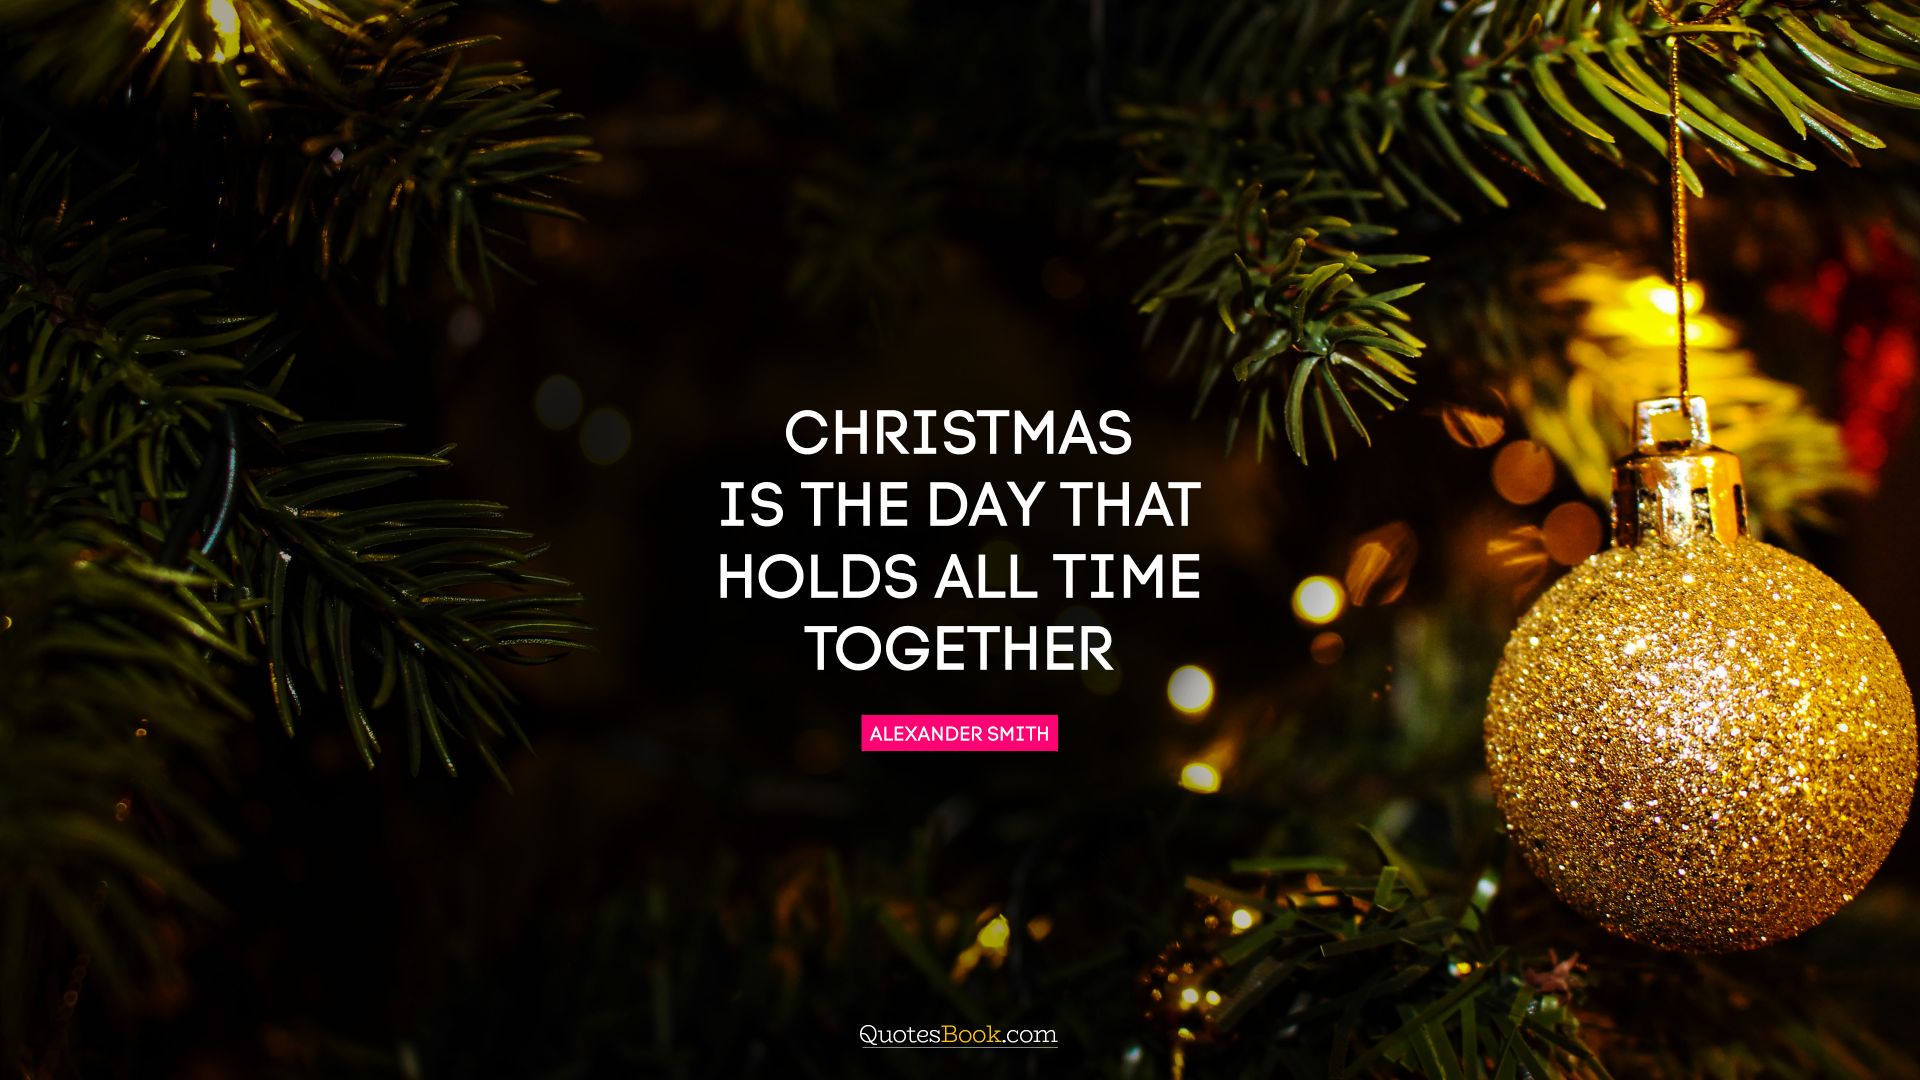 Christmas is the day that holds all time together. - Quote by Alexander Smith